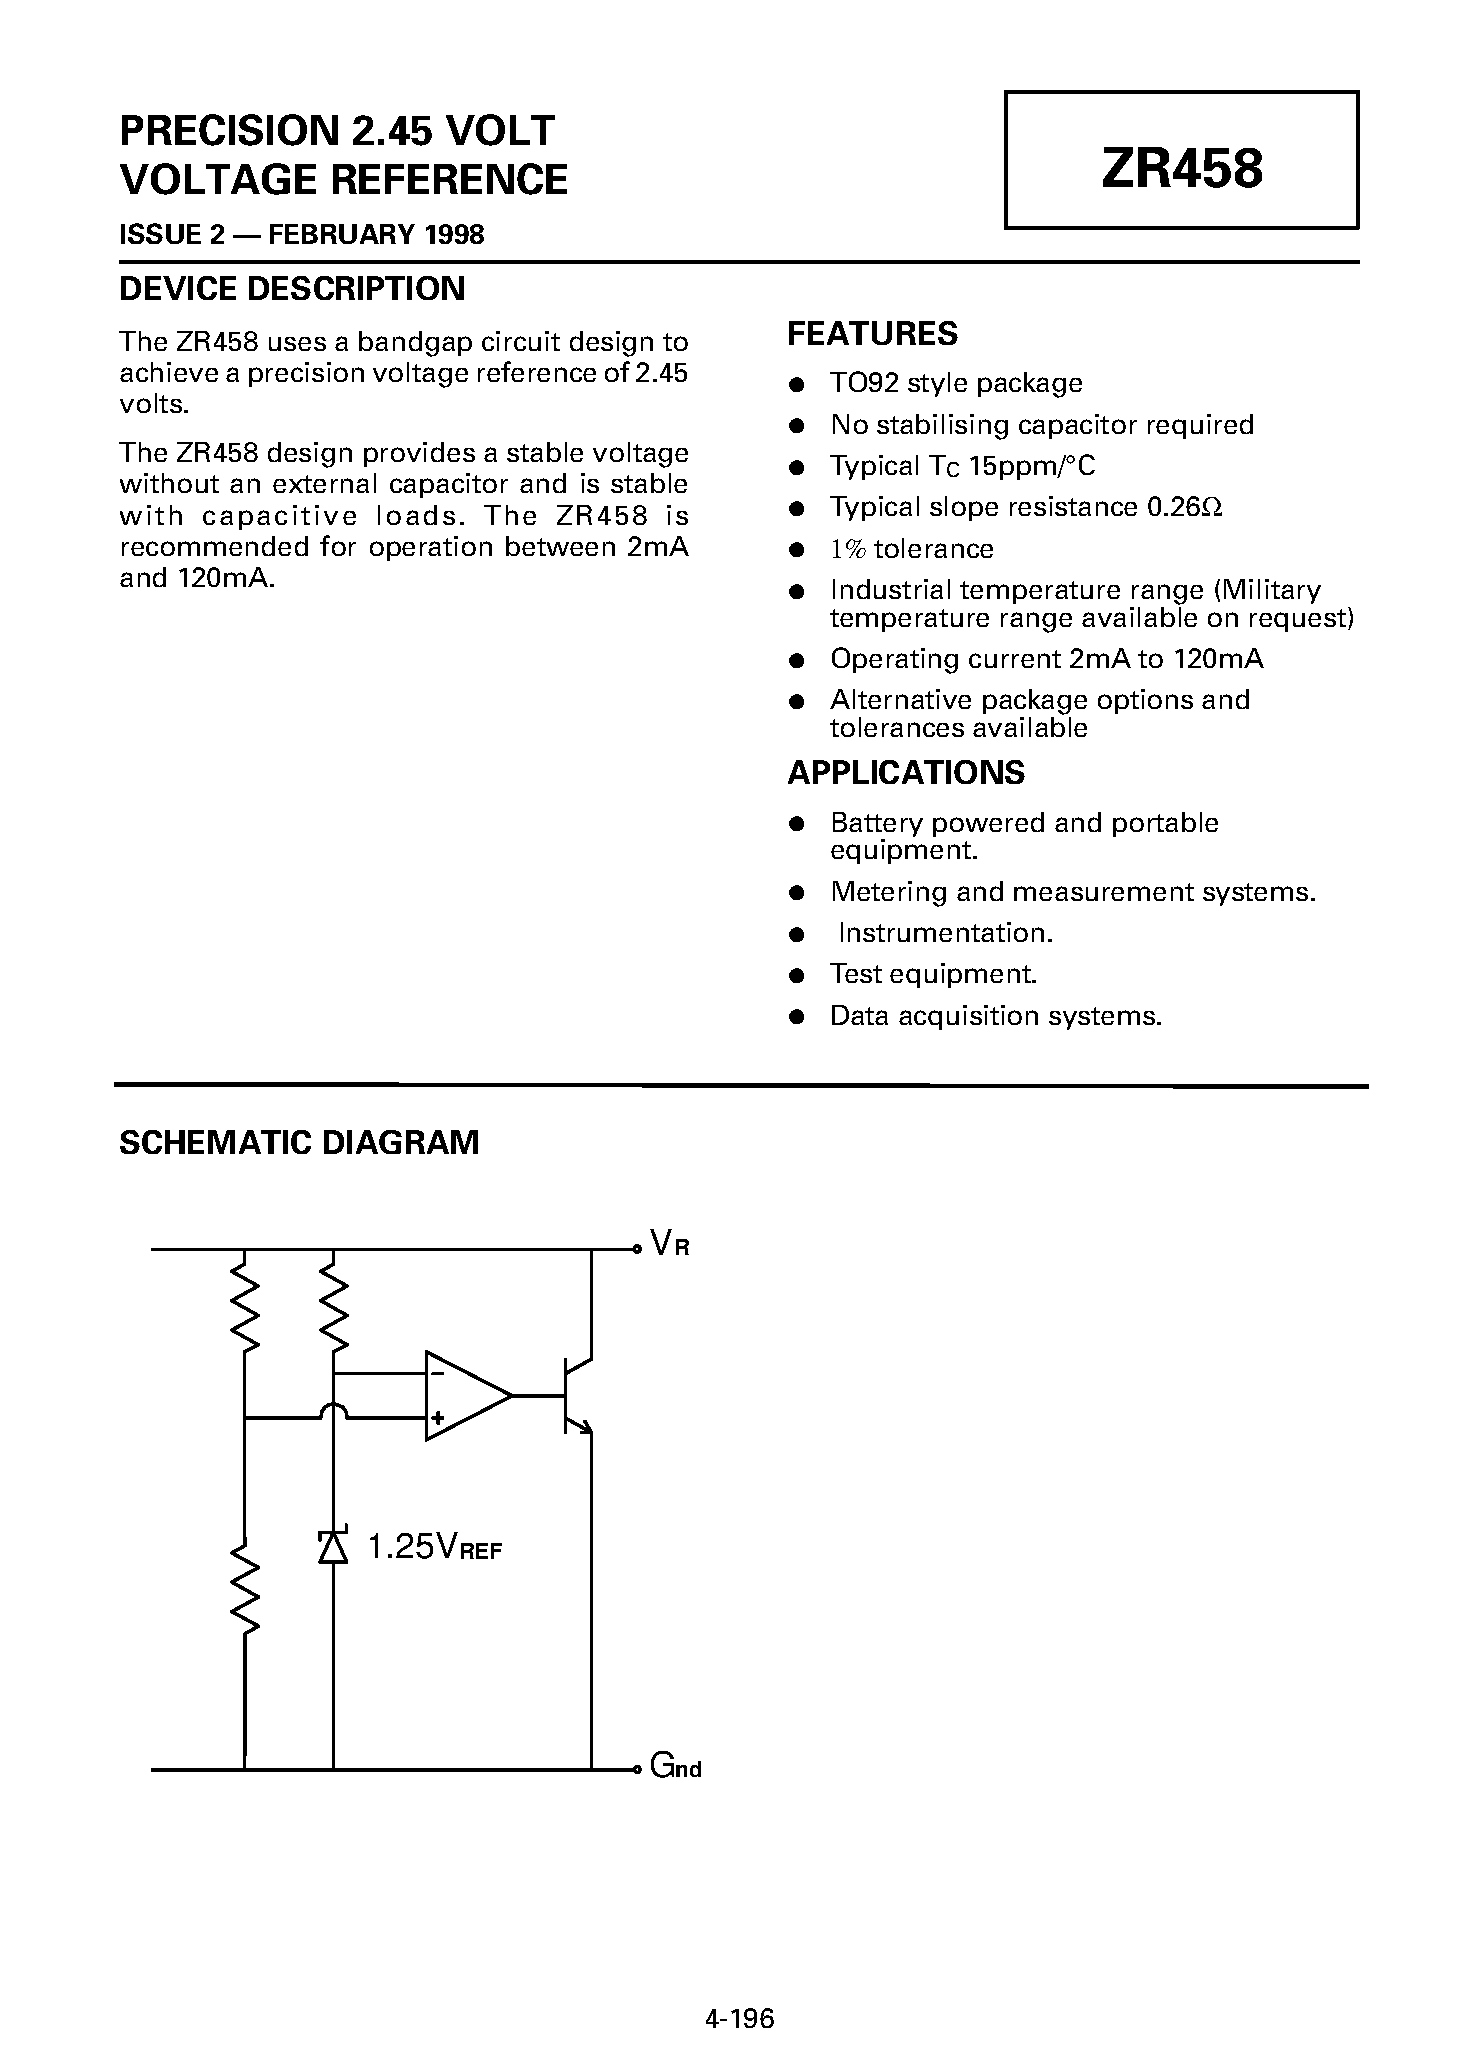 Datasheet ZR458 - PRECISION 2.45 VOLT VOLTAGE REFERENCE page 1